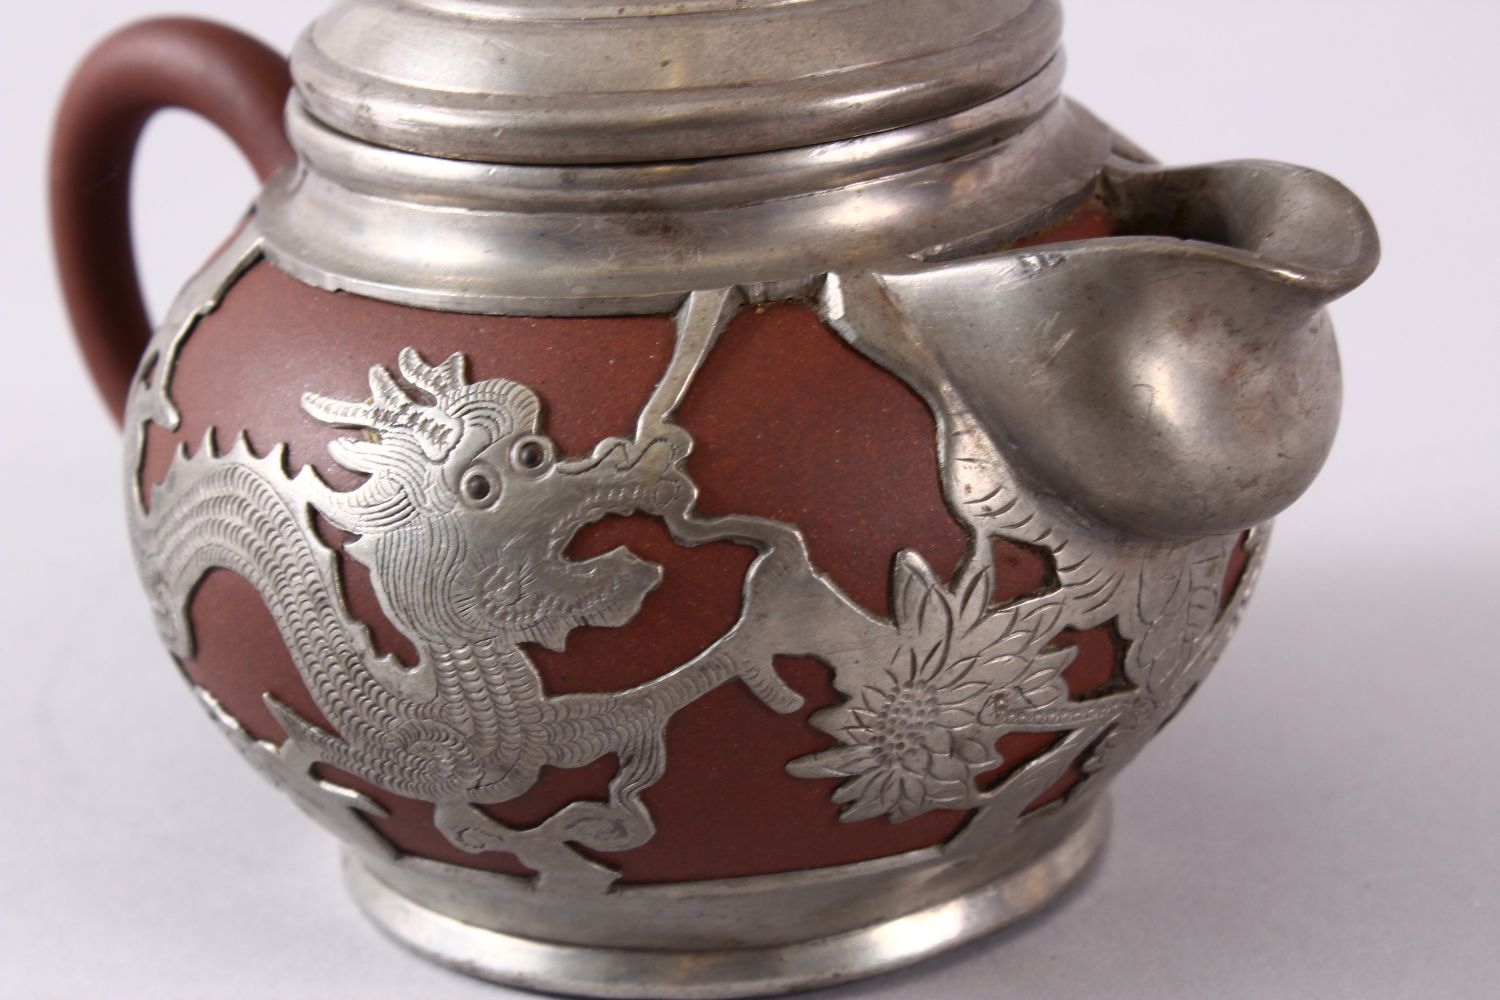 A CHINESE YIXING CLAY & WHITE METAL DRAGON TEAPOT, The body of the teapot encapsulated with a carved - Image 6 of 9